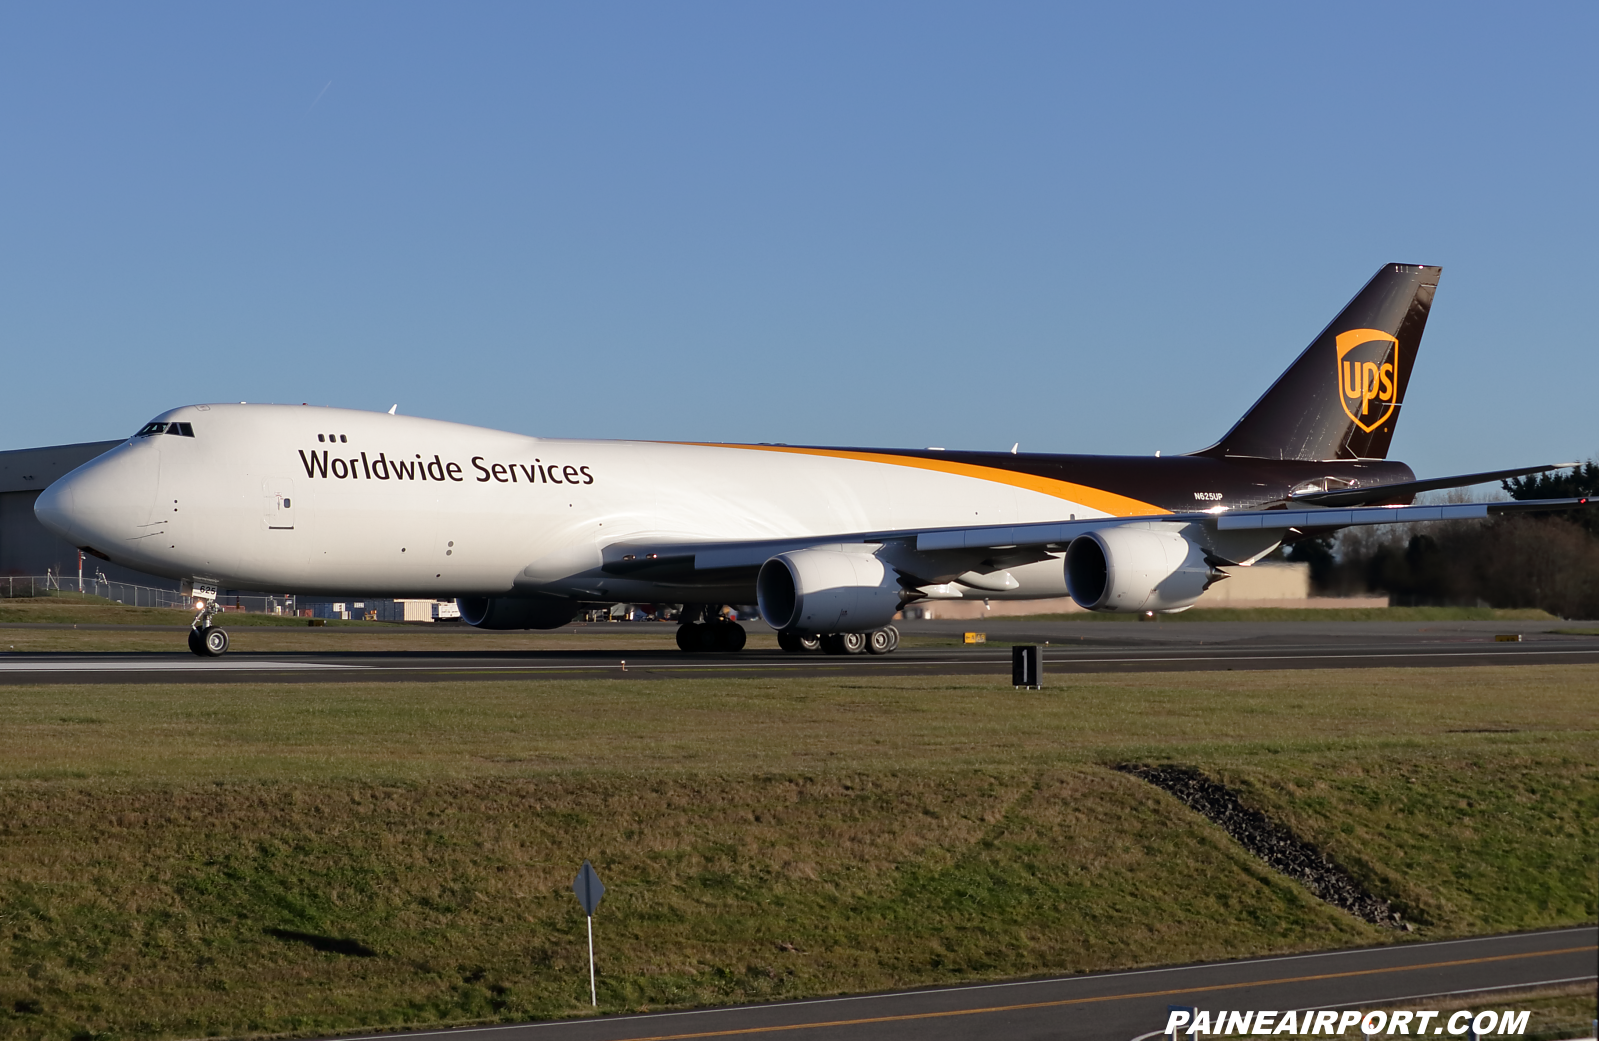 UPS 747-8F N625UP at KPAE Paine Field